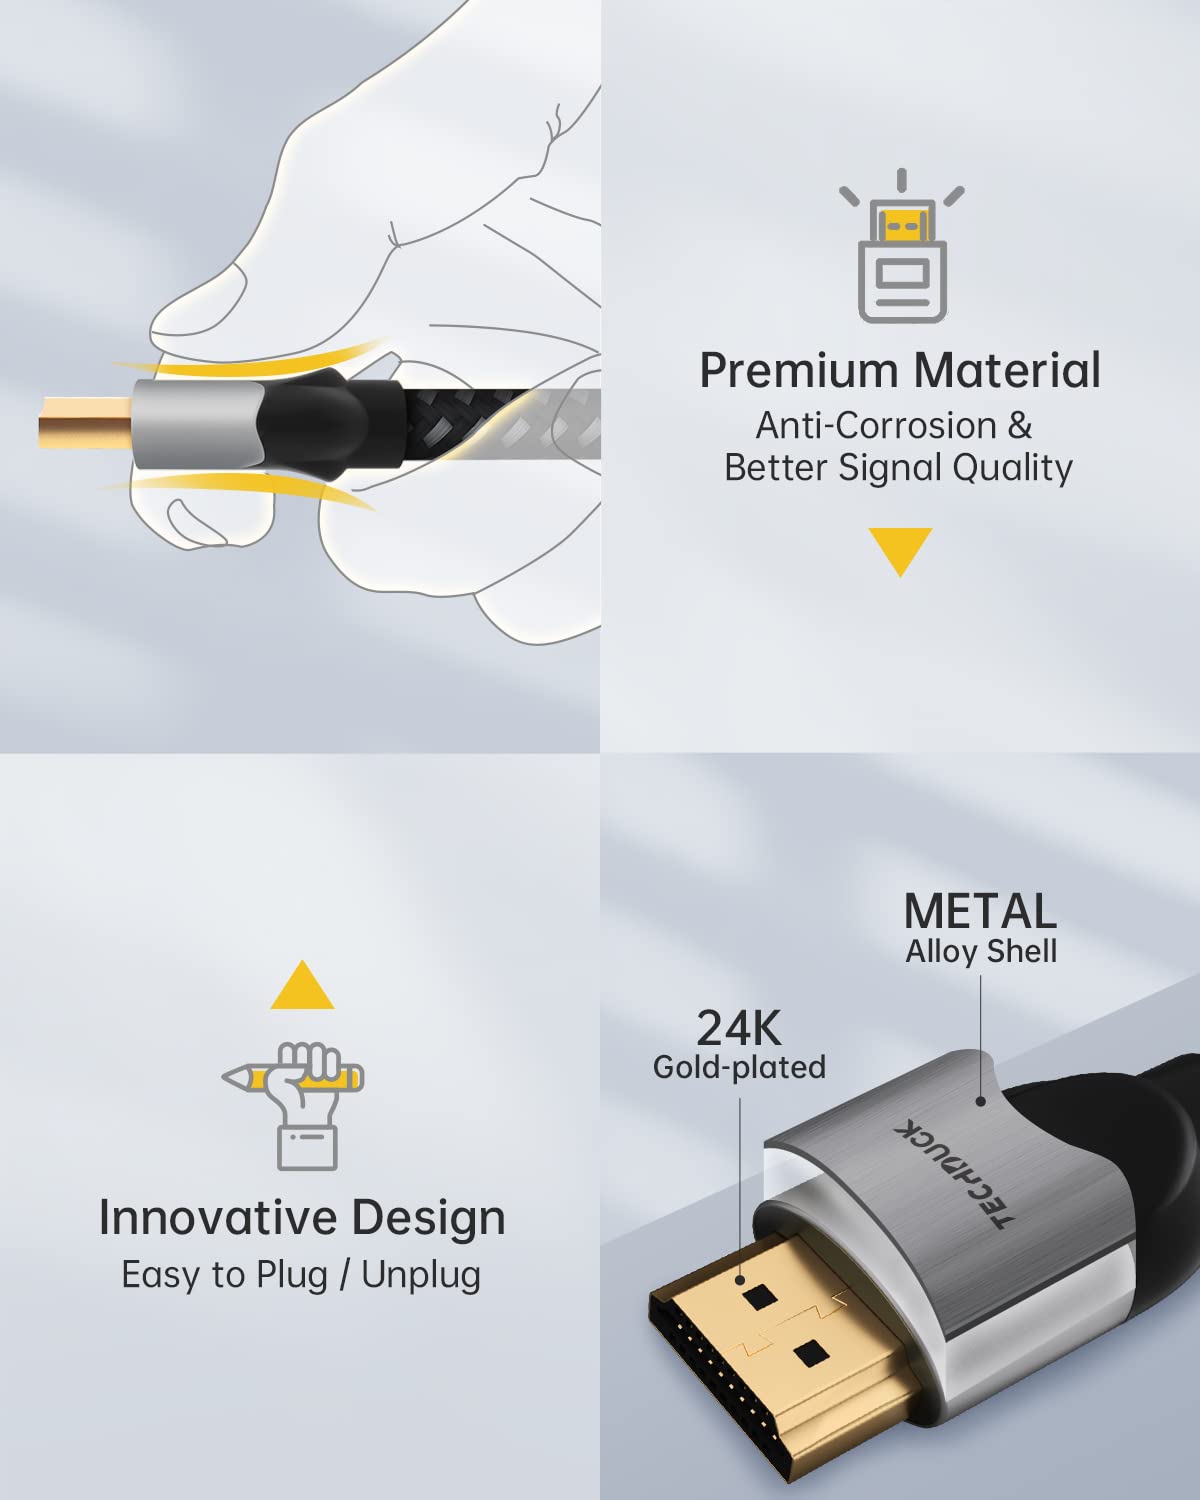 TechDuck 8K HDMI 2.1 Cable: The Ultimate Gaming and Home Cinema Experience